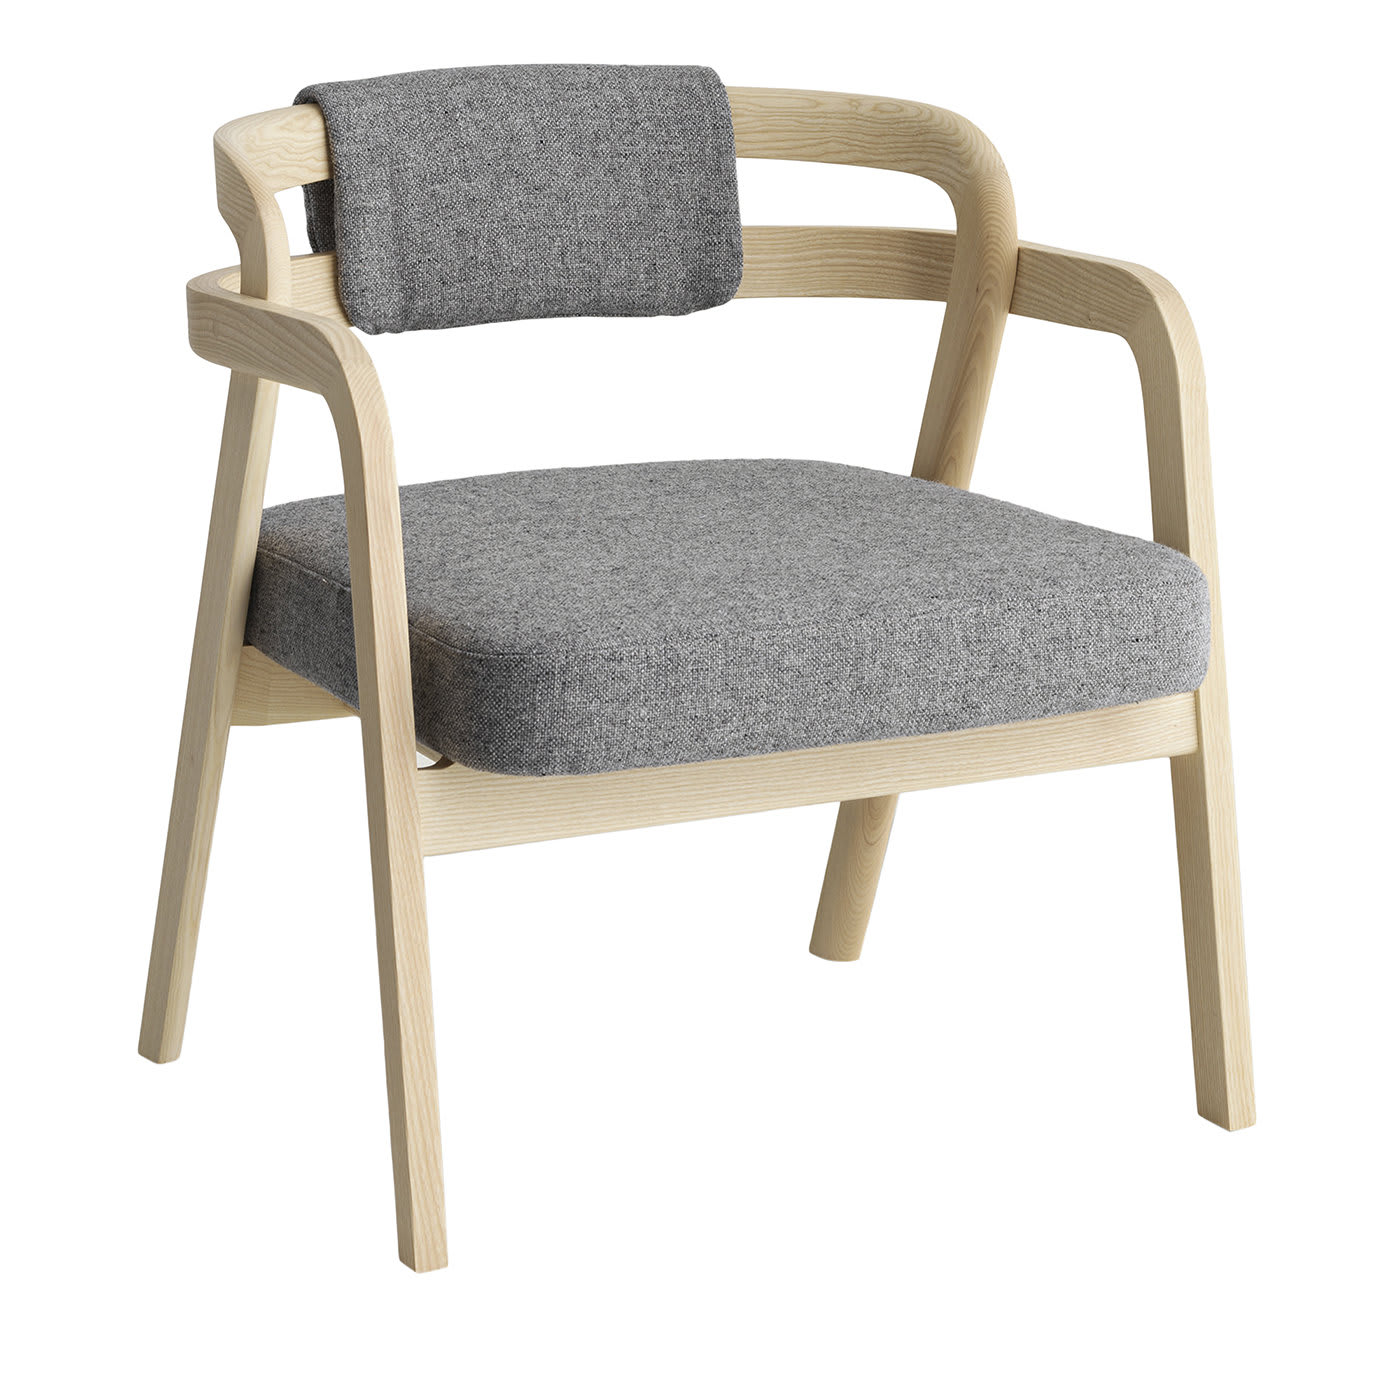 Genea Lazy Natural Ash Lounge Chair with Gray Upholstered Seat and Back - Passoni Design